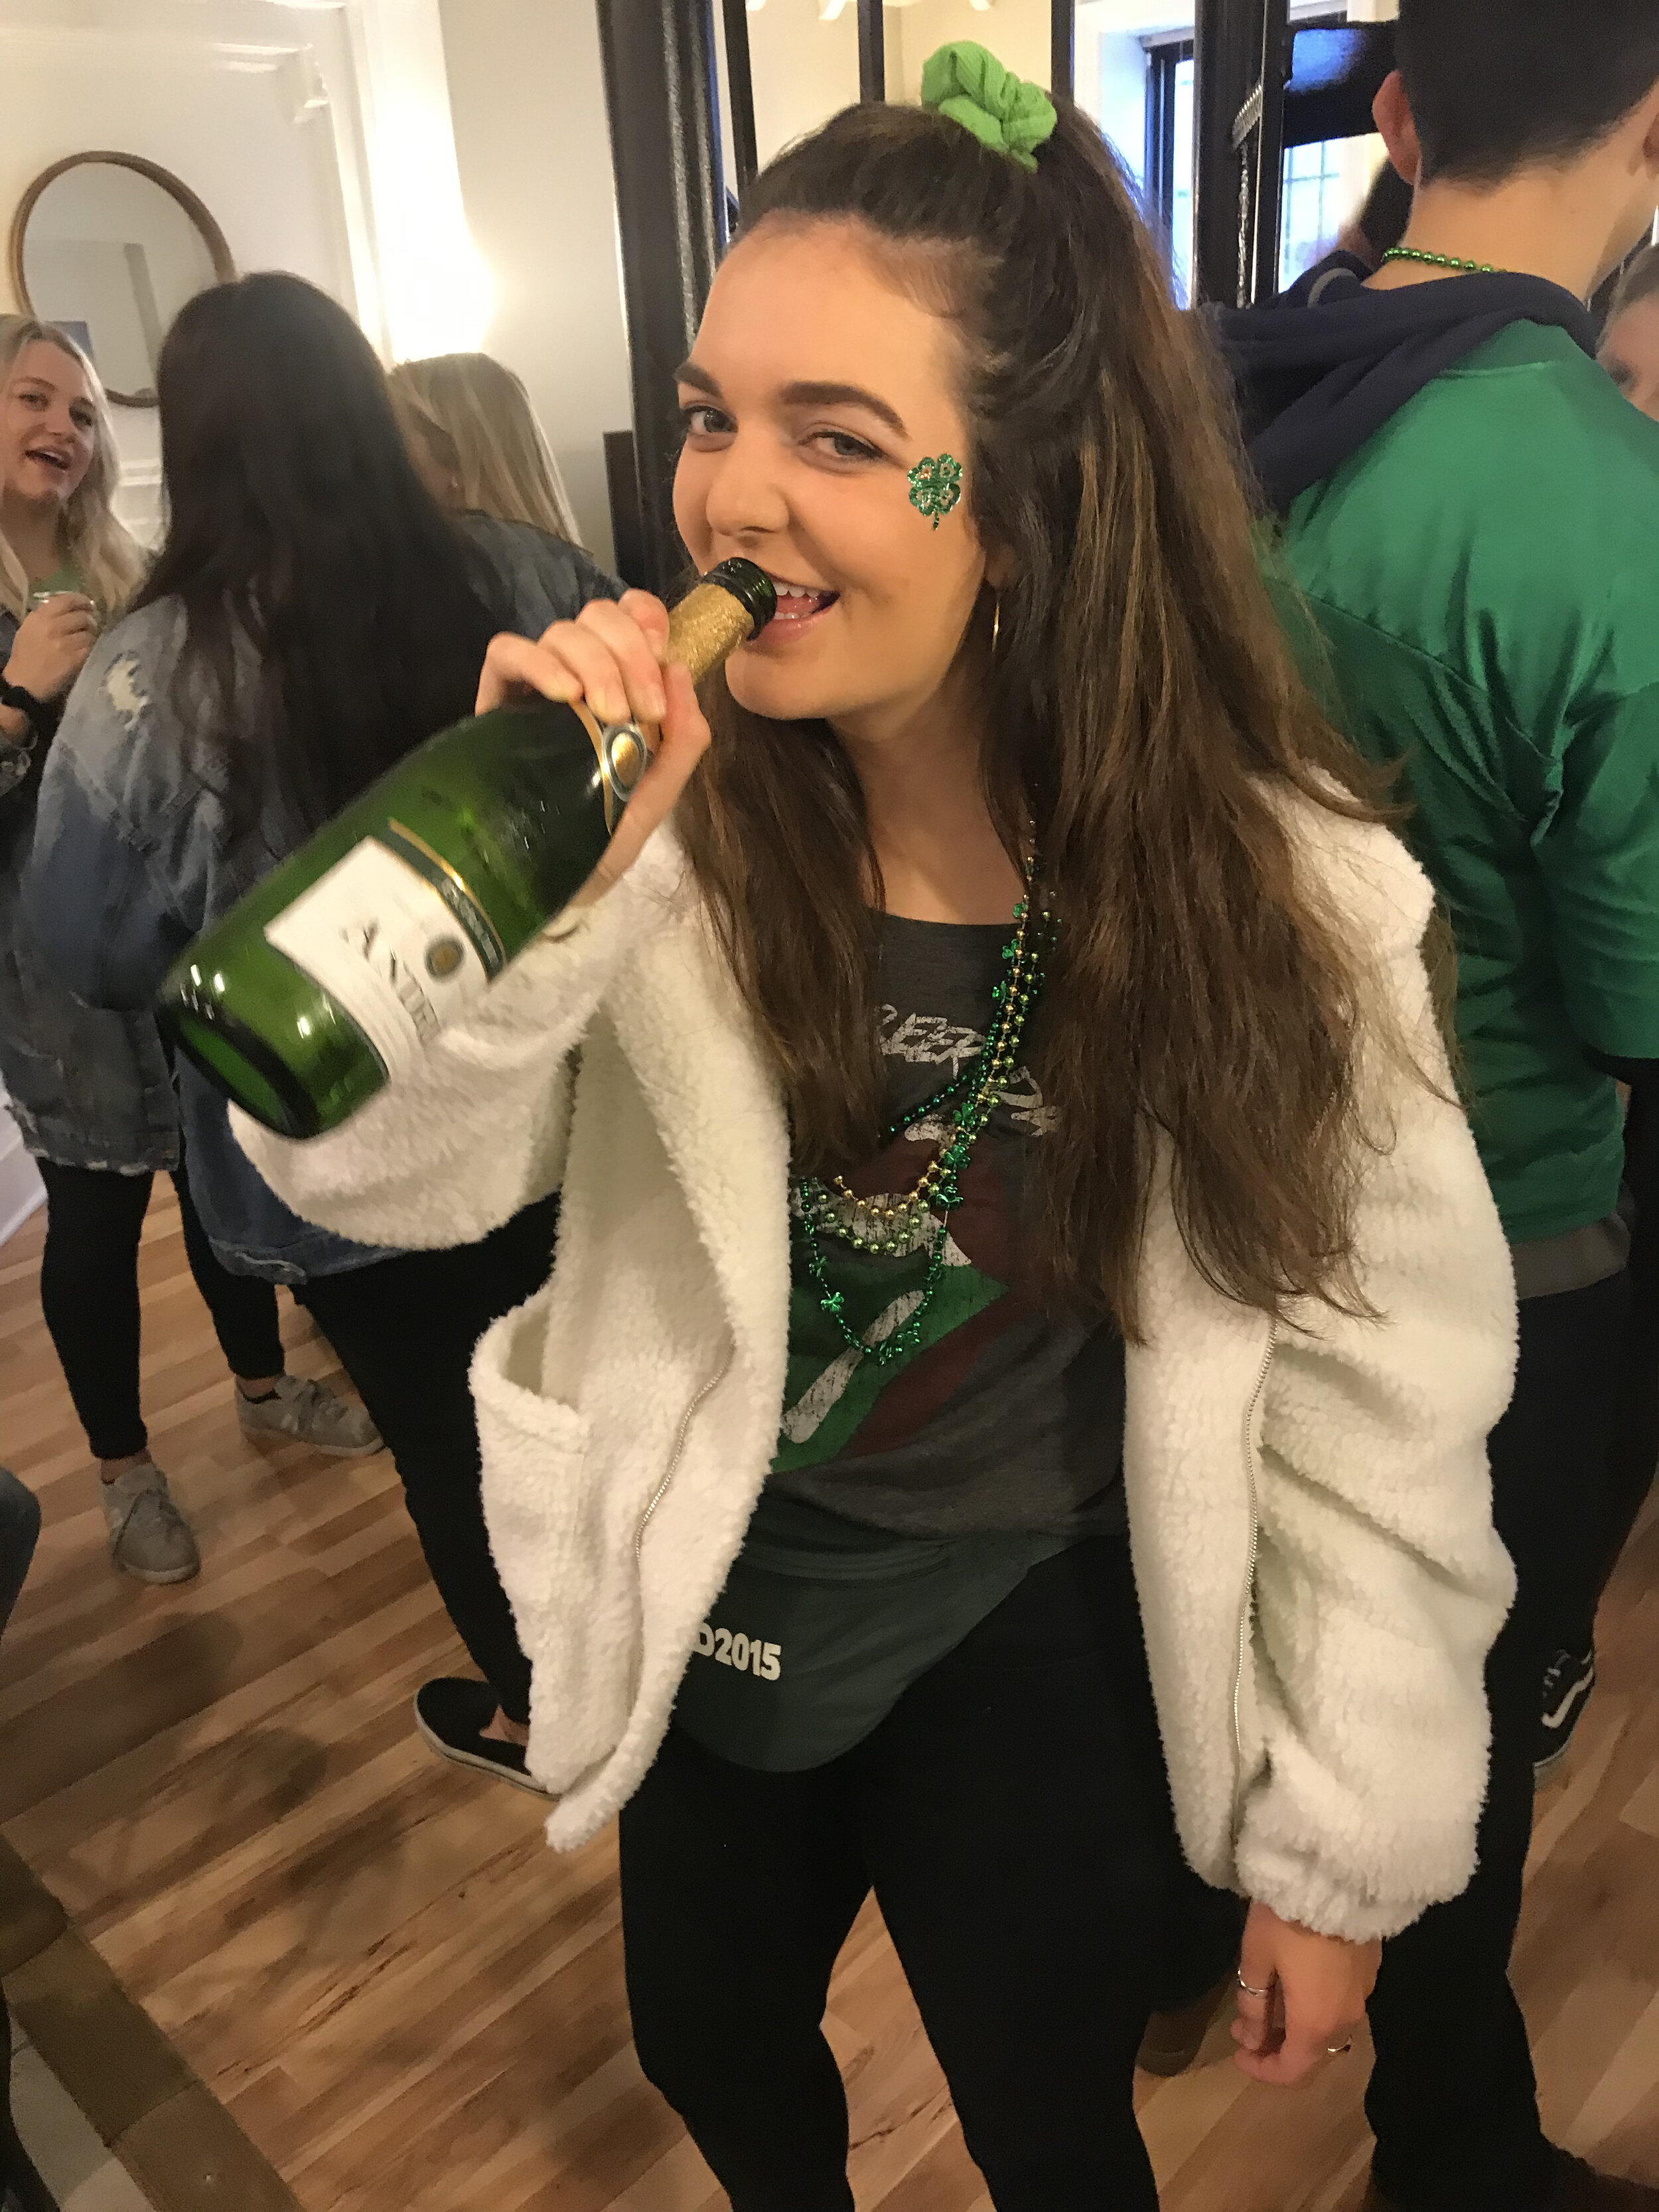 My first St. Patrick’s Day in Chicago seeing the green river Circa 2019 that I was miserably hungover for days after.